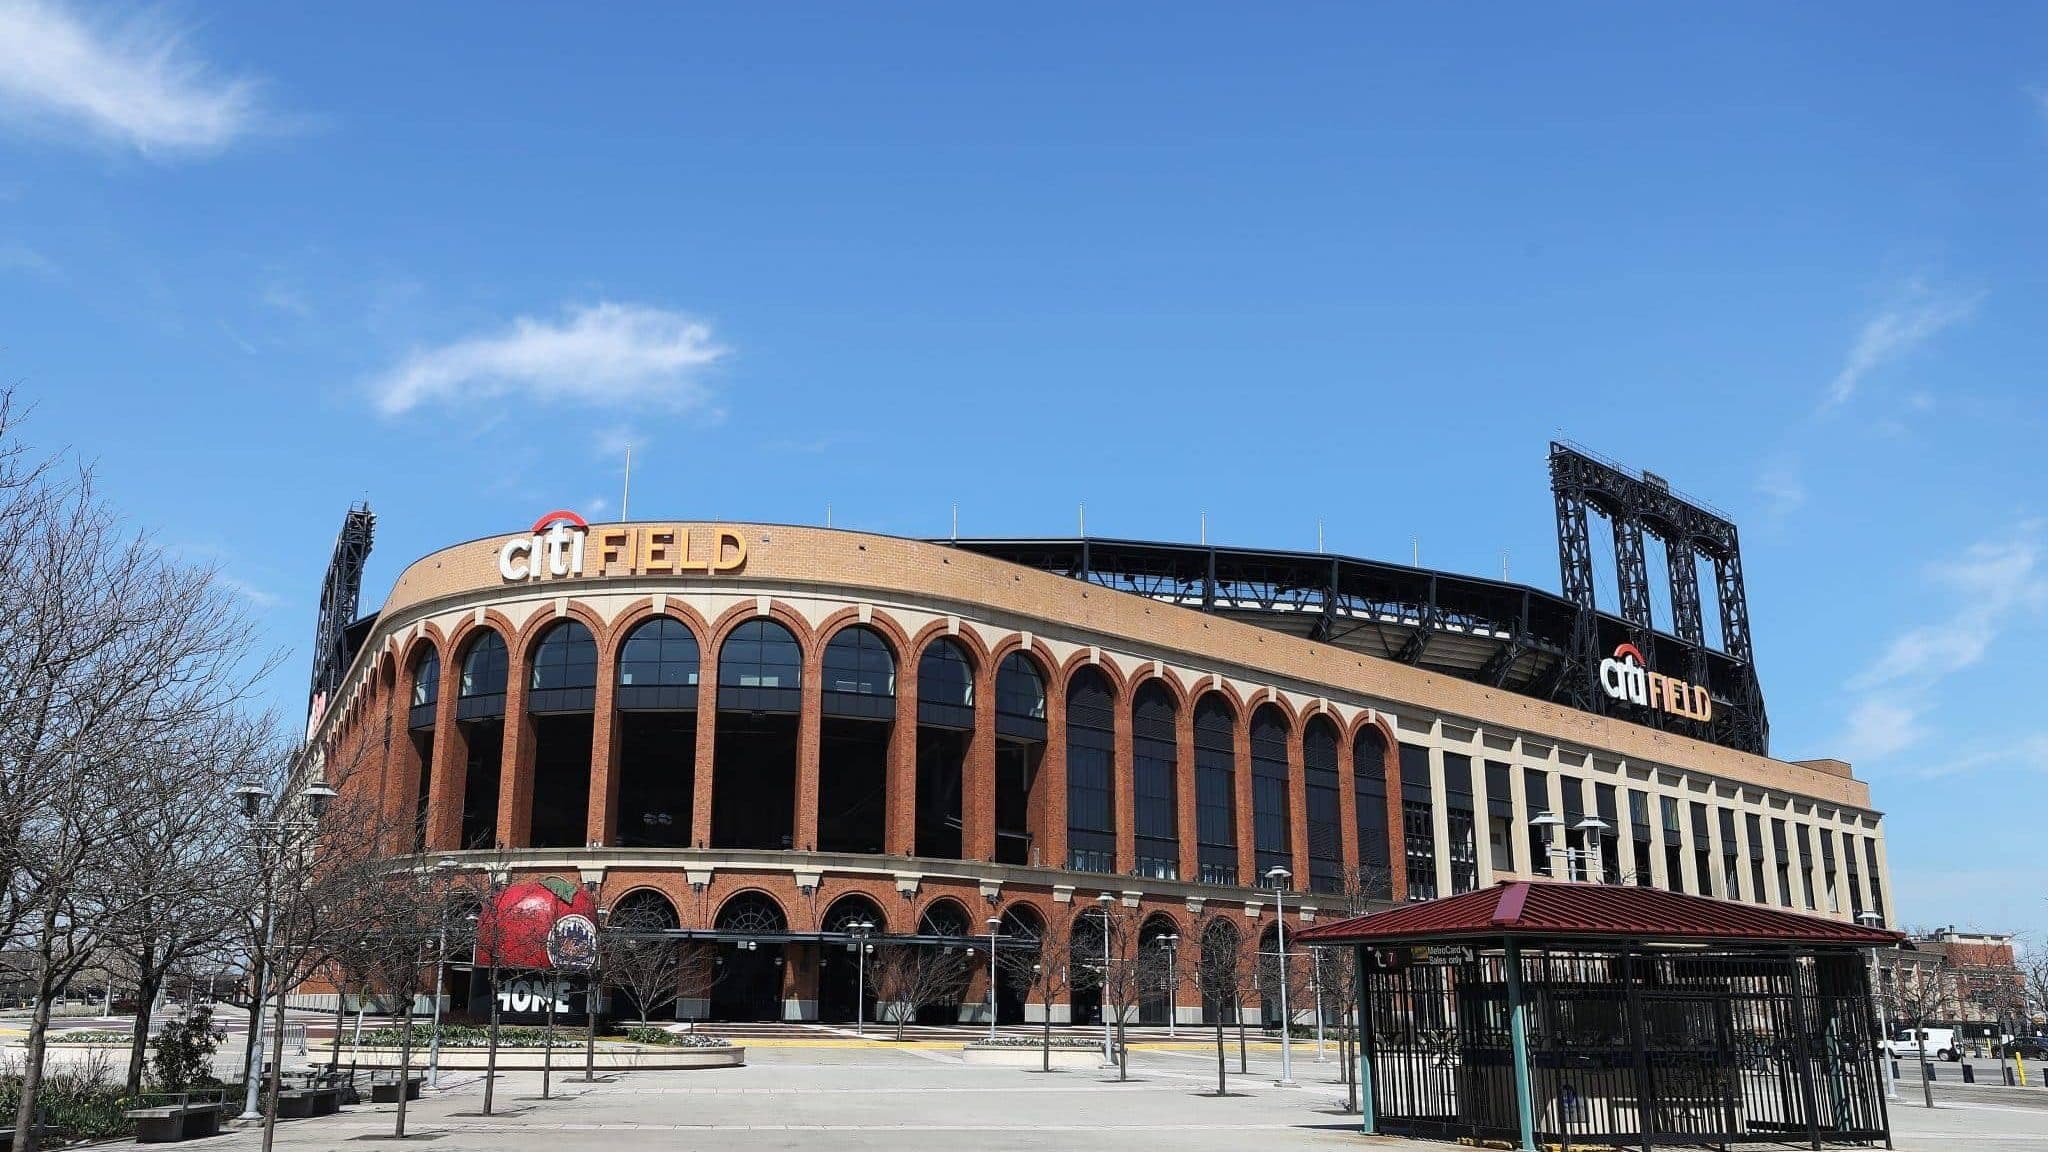 FLUSHING, NEW YORK - MARCH 26: Citi Field is empty on the scheduled date for Opening Day March 26, 2020 in Flushing, New York. Major League Baseball has postponed the start of its season due to the coronavirus (COVID-19) outbreak and MLB commissioner Rob Manfred recently said the league is 